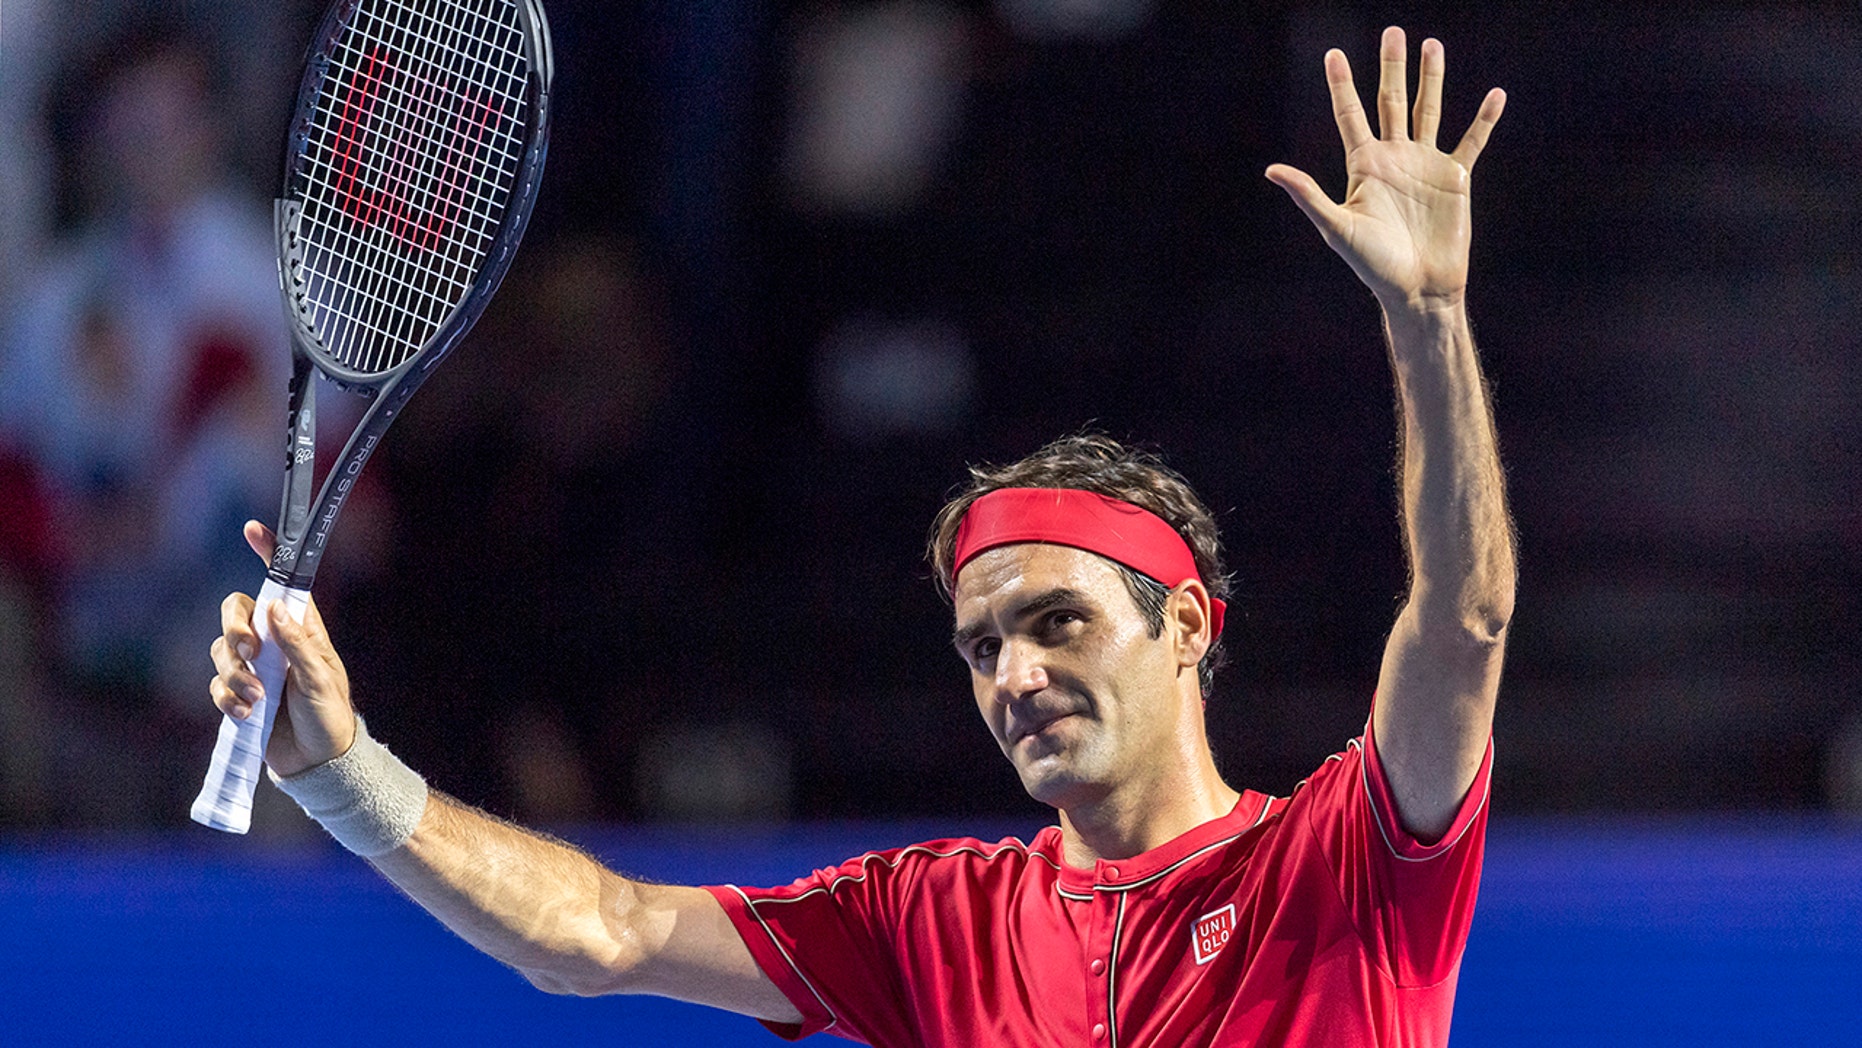 Switzerland's Roger Federer acknowledges the crowd after winning his first round match against Germany's Peter Gojowczyk at the Swiss Indoor tennis tournament at the St. Jakobshalle in Basel, Switzerland, on Monday, Oct. 21, 2019. (Georgios Kefalas/Keystone via AP)